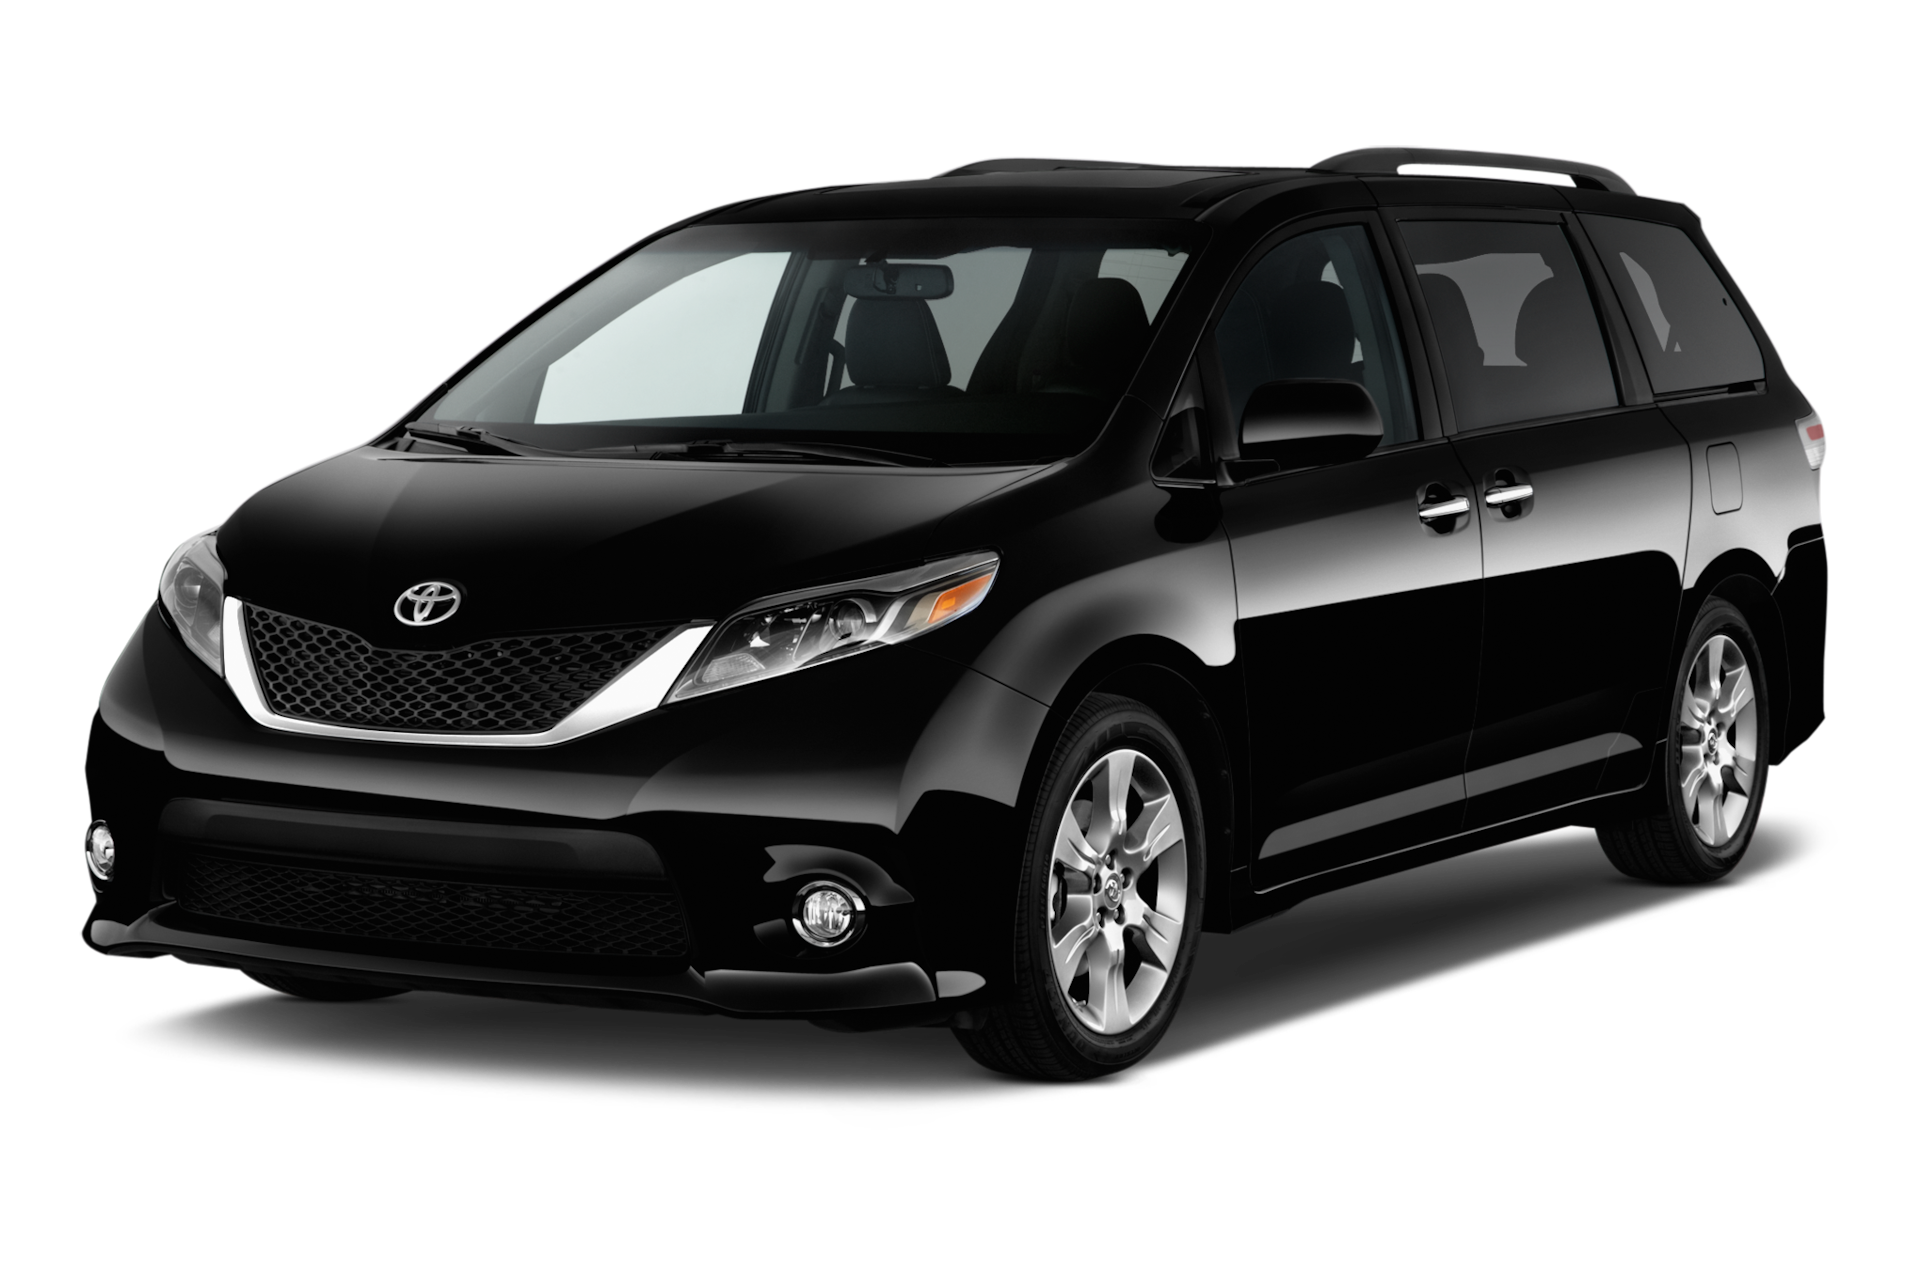 2015 Toyota Sienna Prices, Reviews, and Photos - MotorTrend